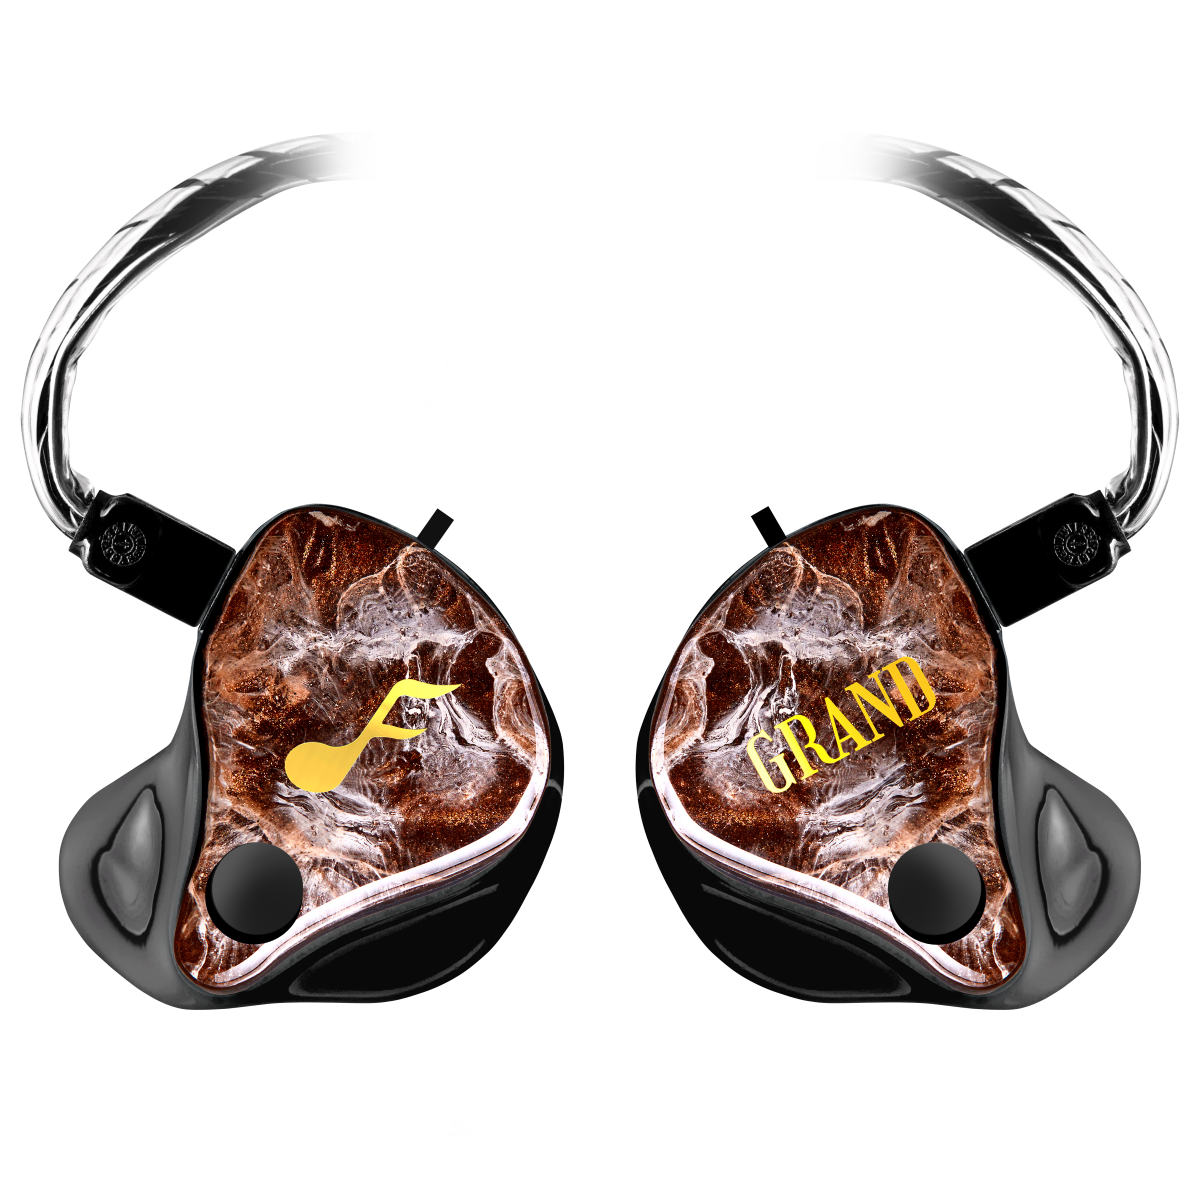 GRAND Maestro Custom IEM - Prices from 5486.00 to 5580.00